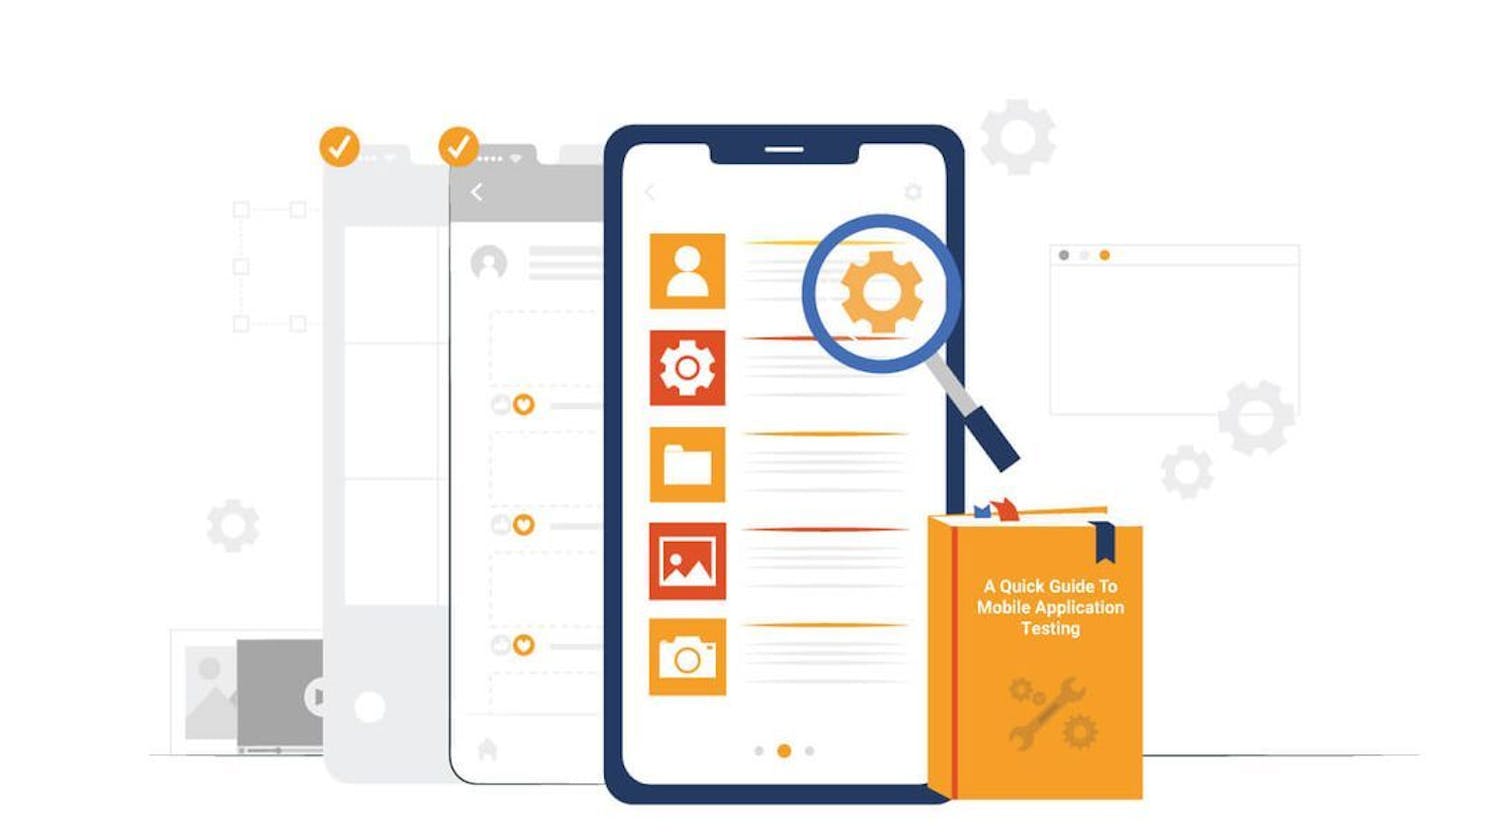 A Quick Guide To Mobile Application Testing